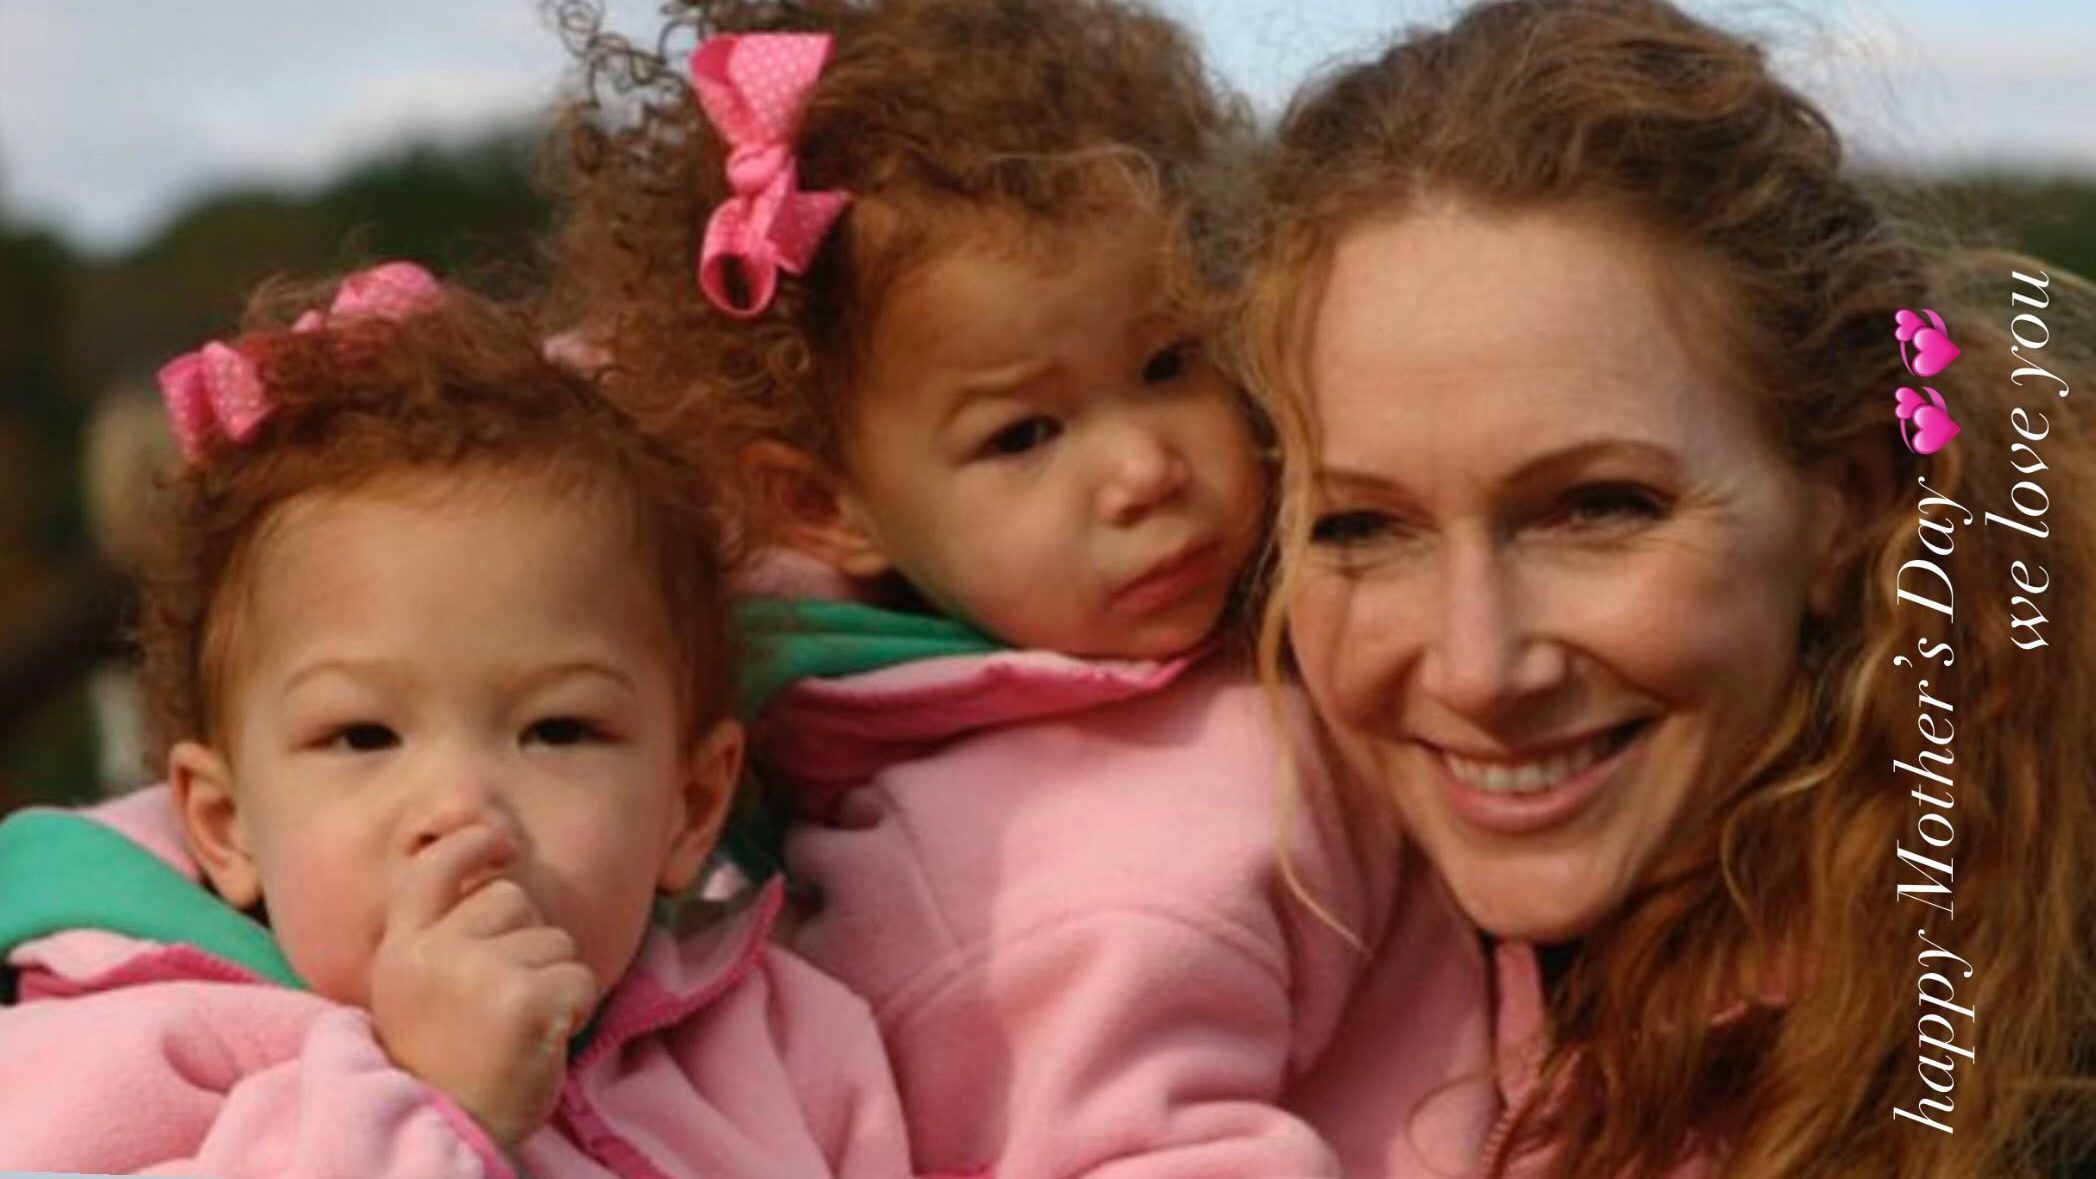 Sophia shared a throwback photo of herself and Isabella as toddlers with their mother